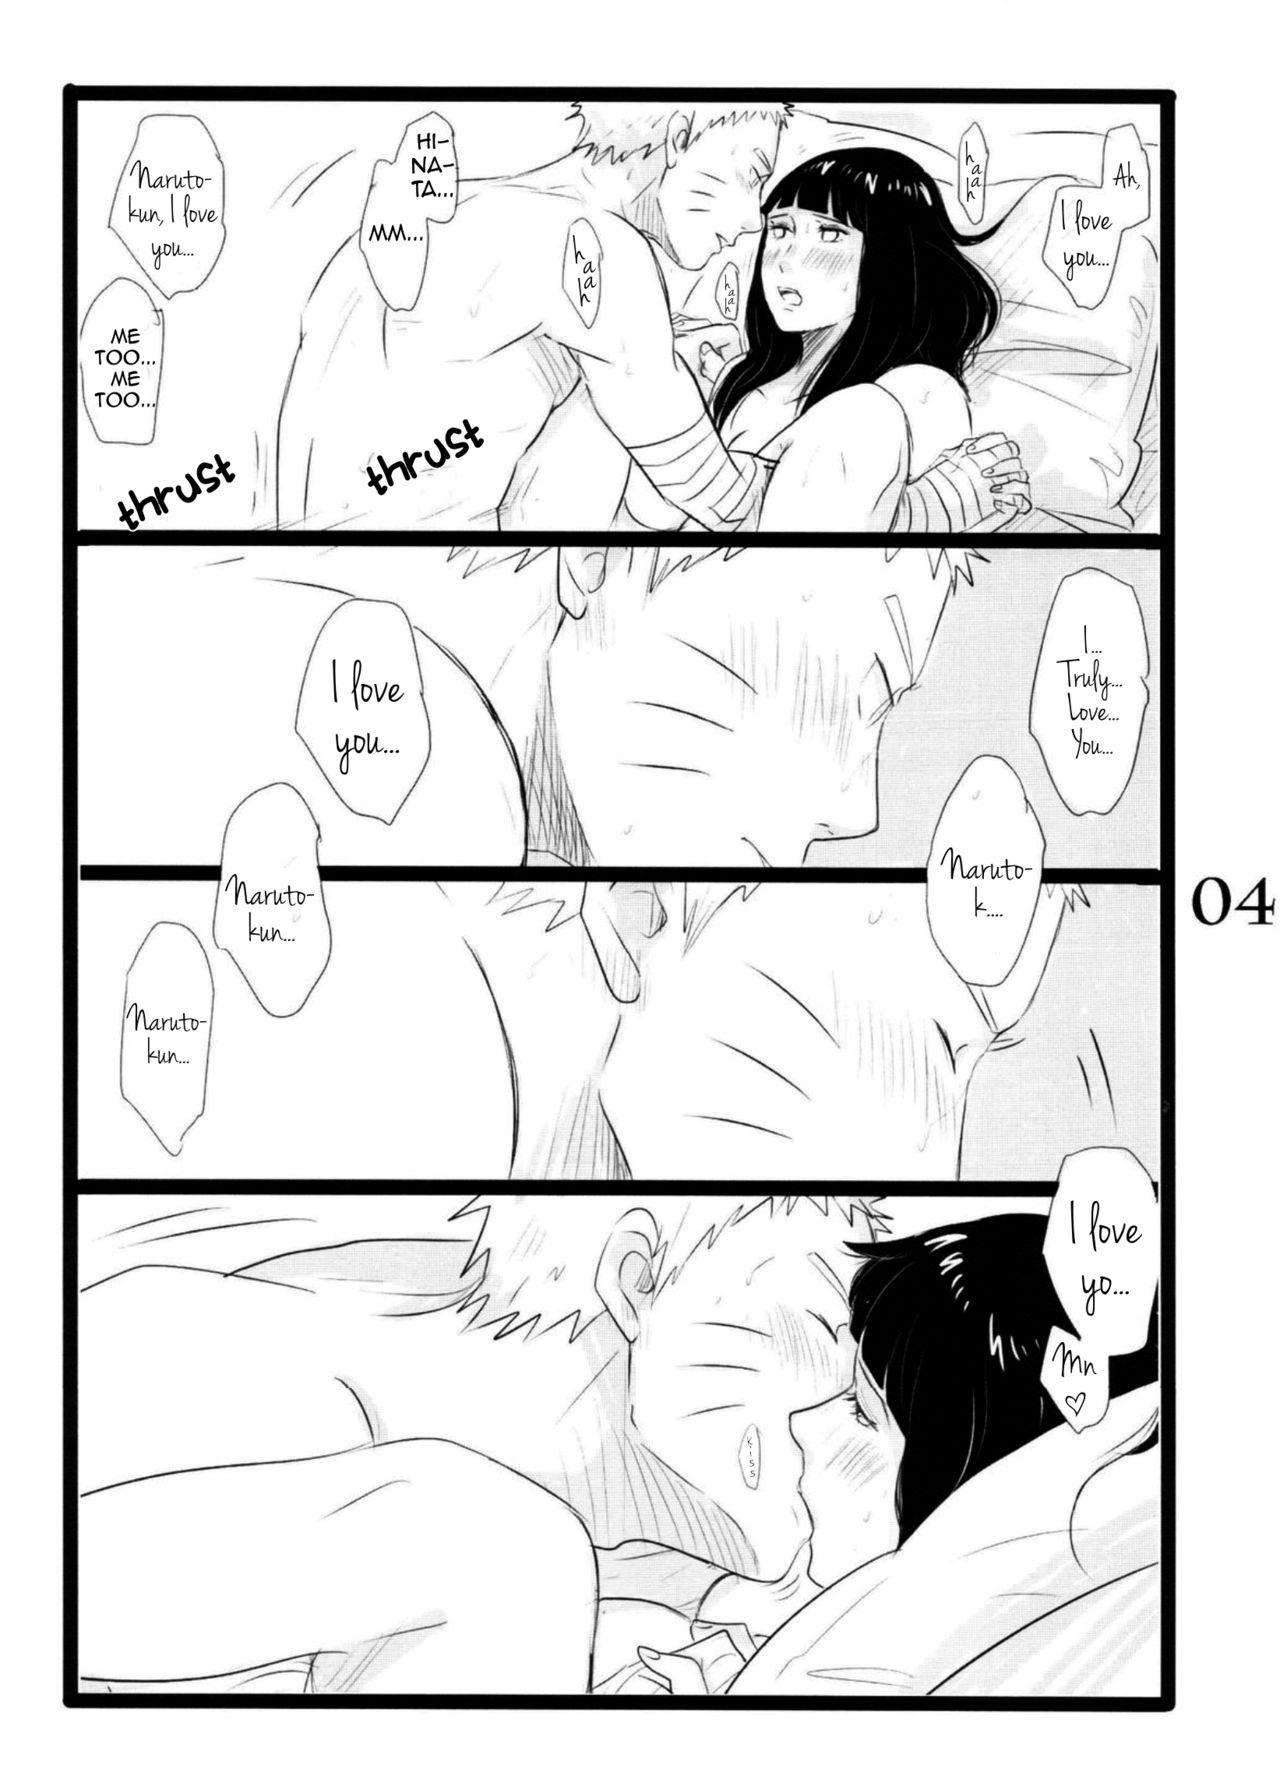 Classy YOUR MY SWEET - I LOVE YOU DARLING - Naruto Blowjob Contest - Page 5